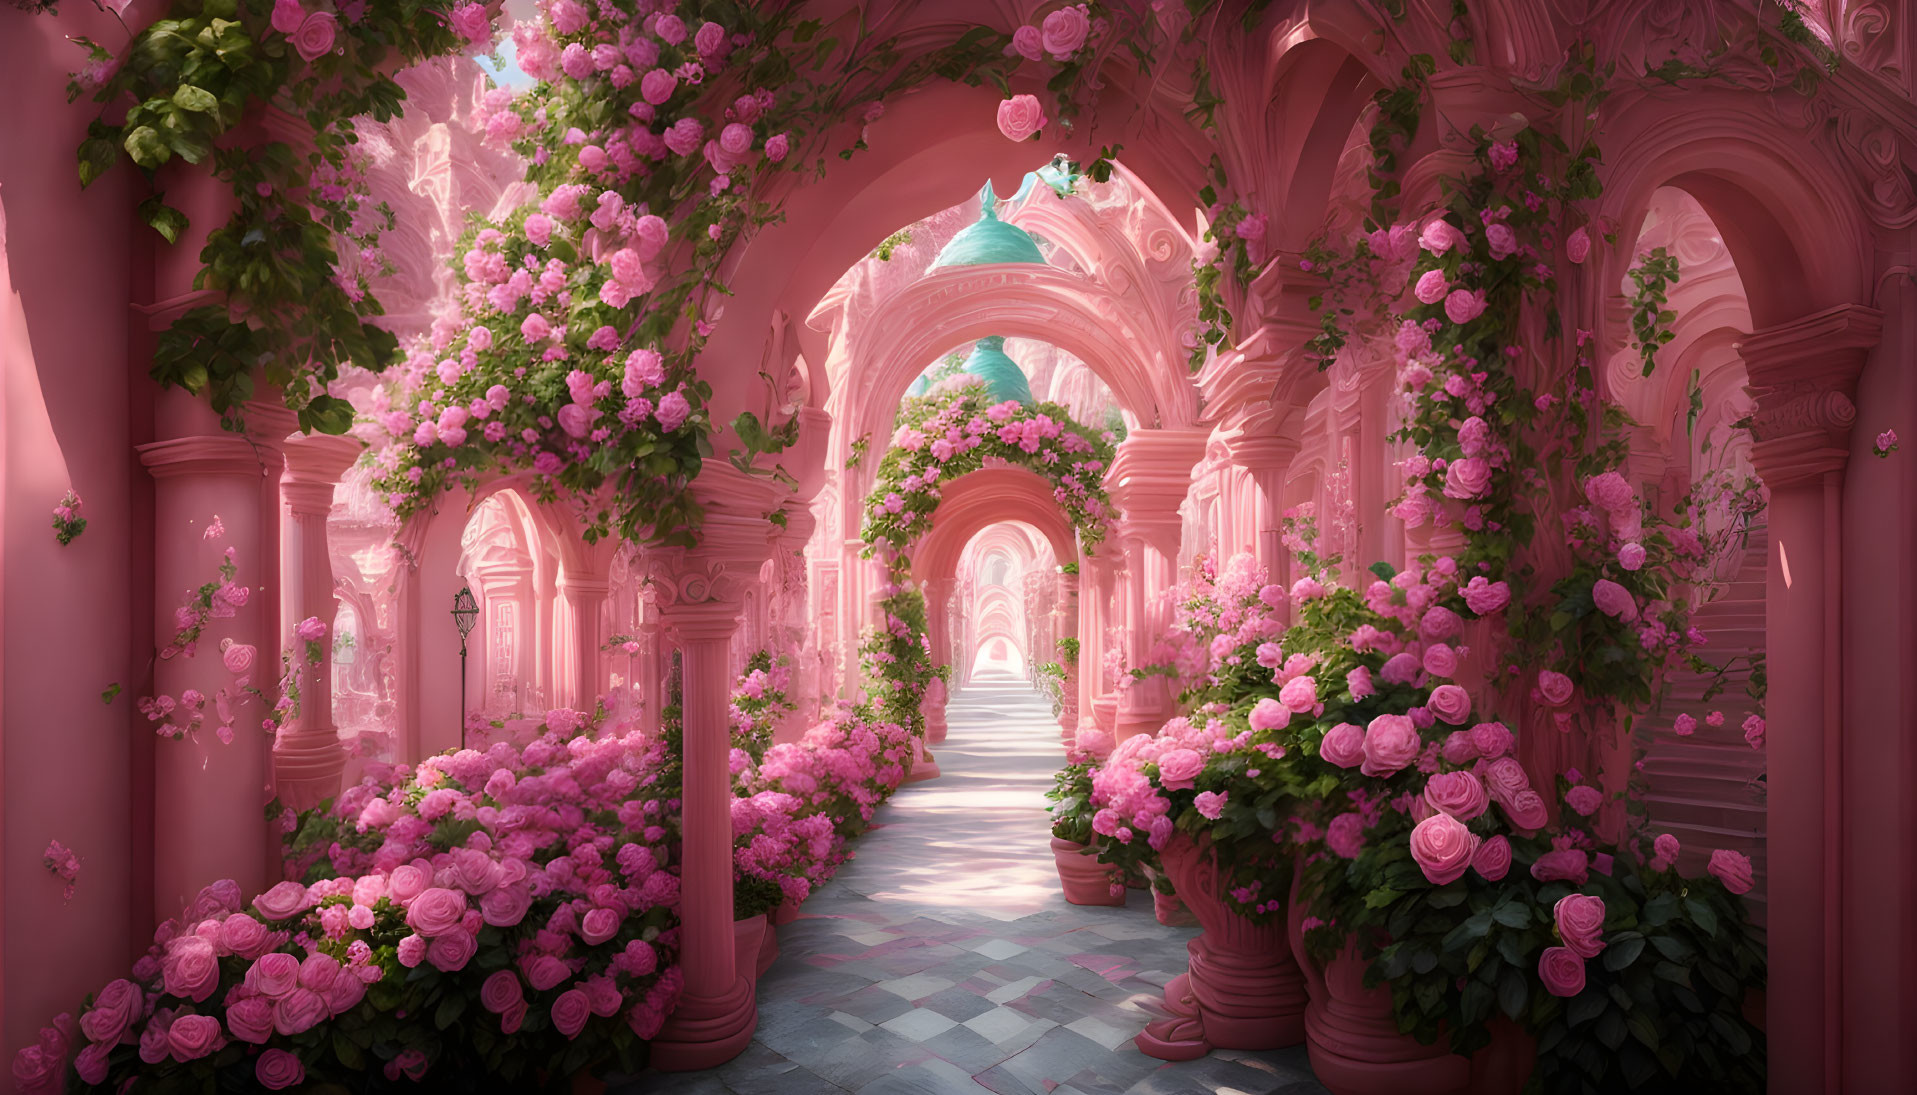 Pink flower archway over checkered pathway to light-filled exit